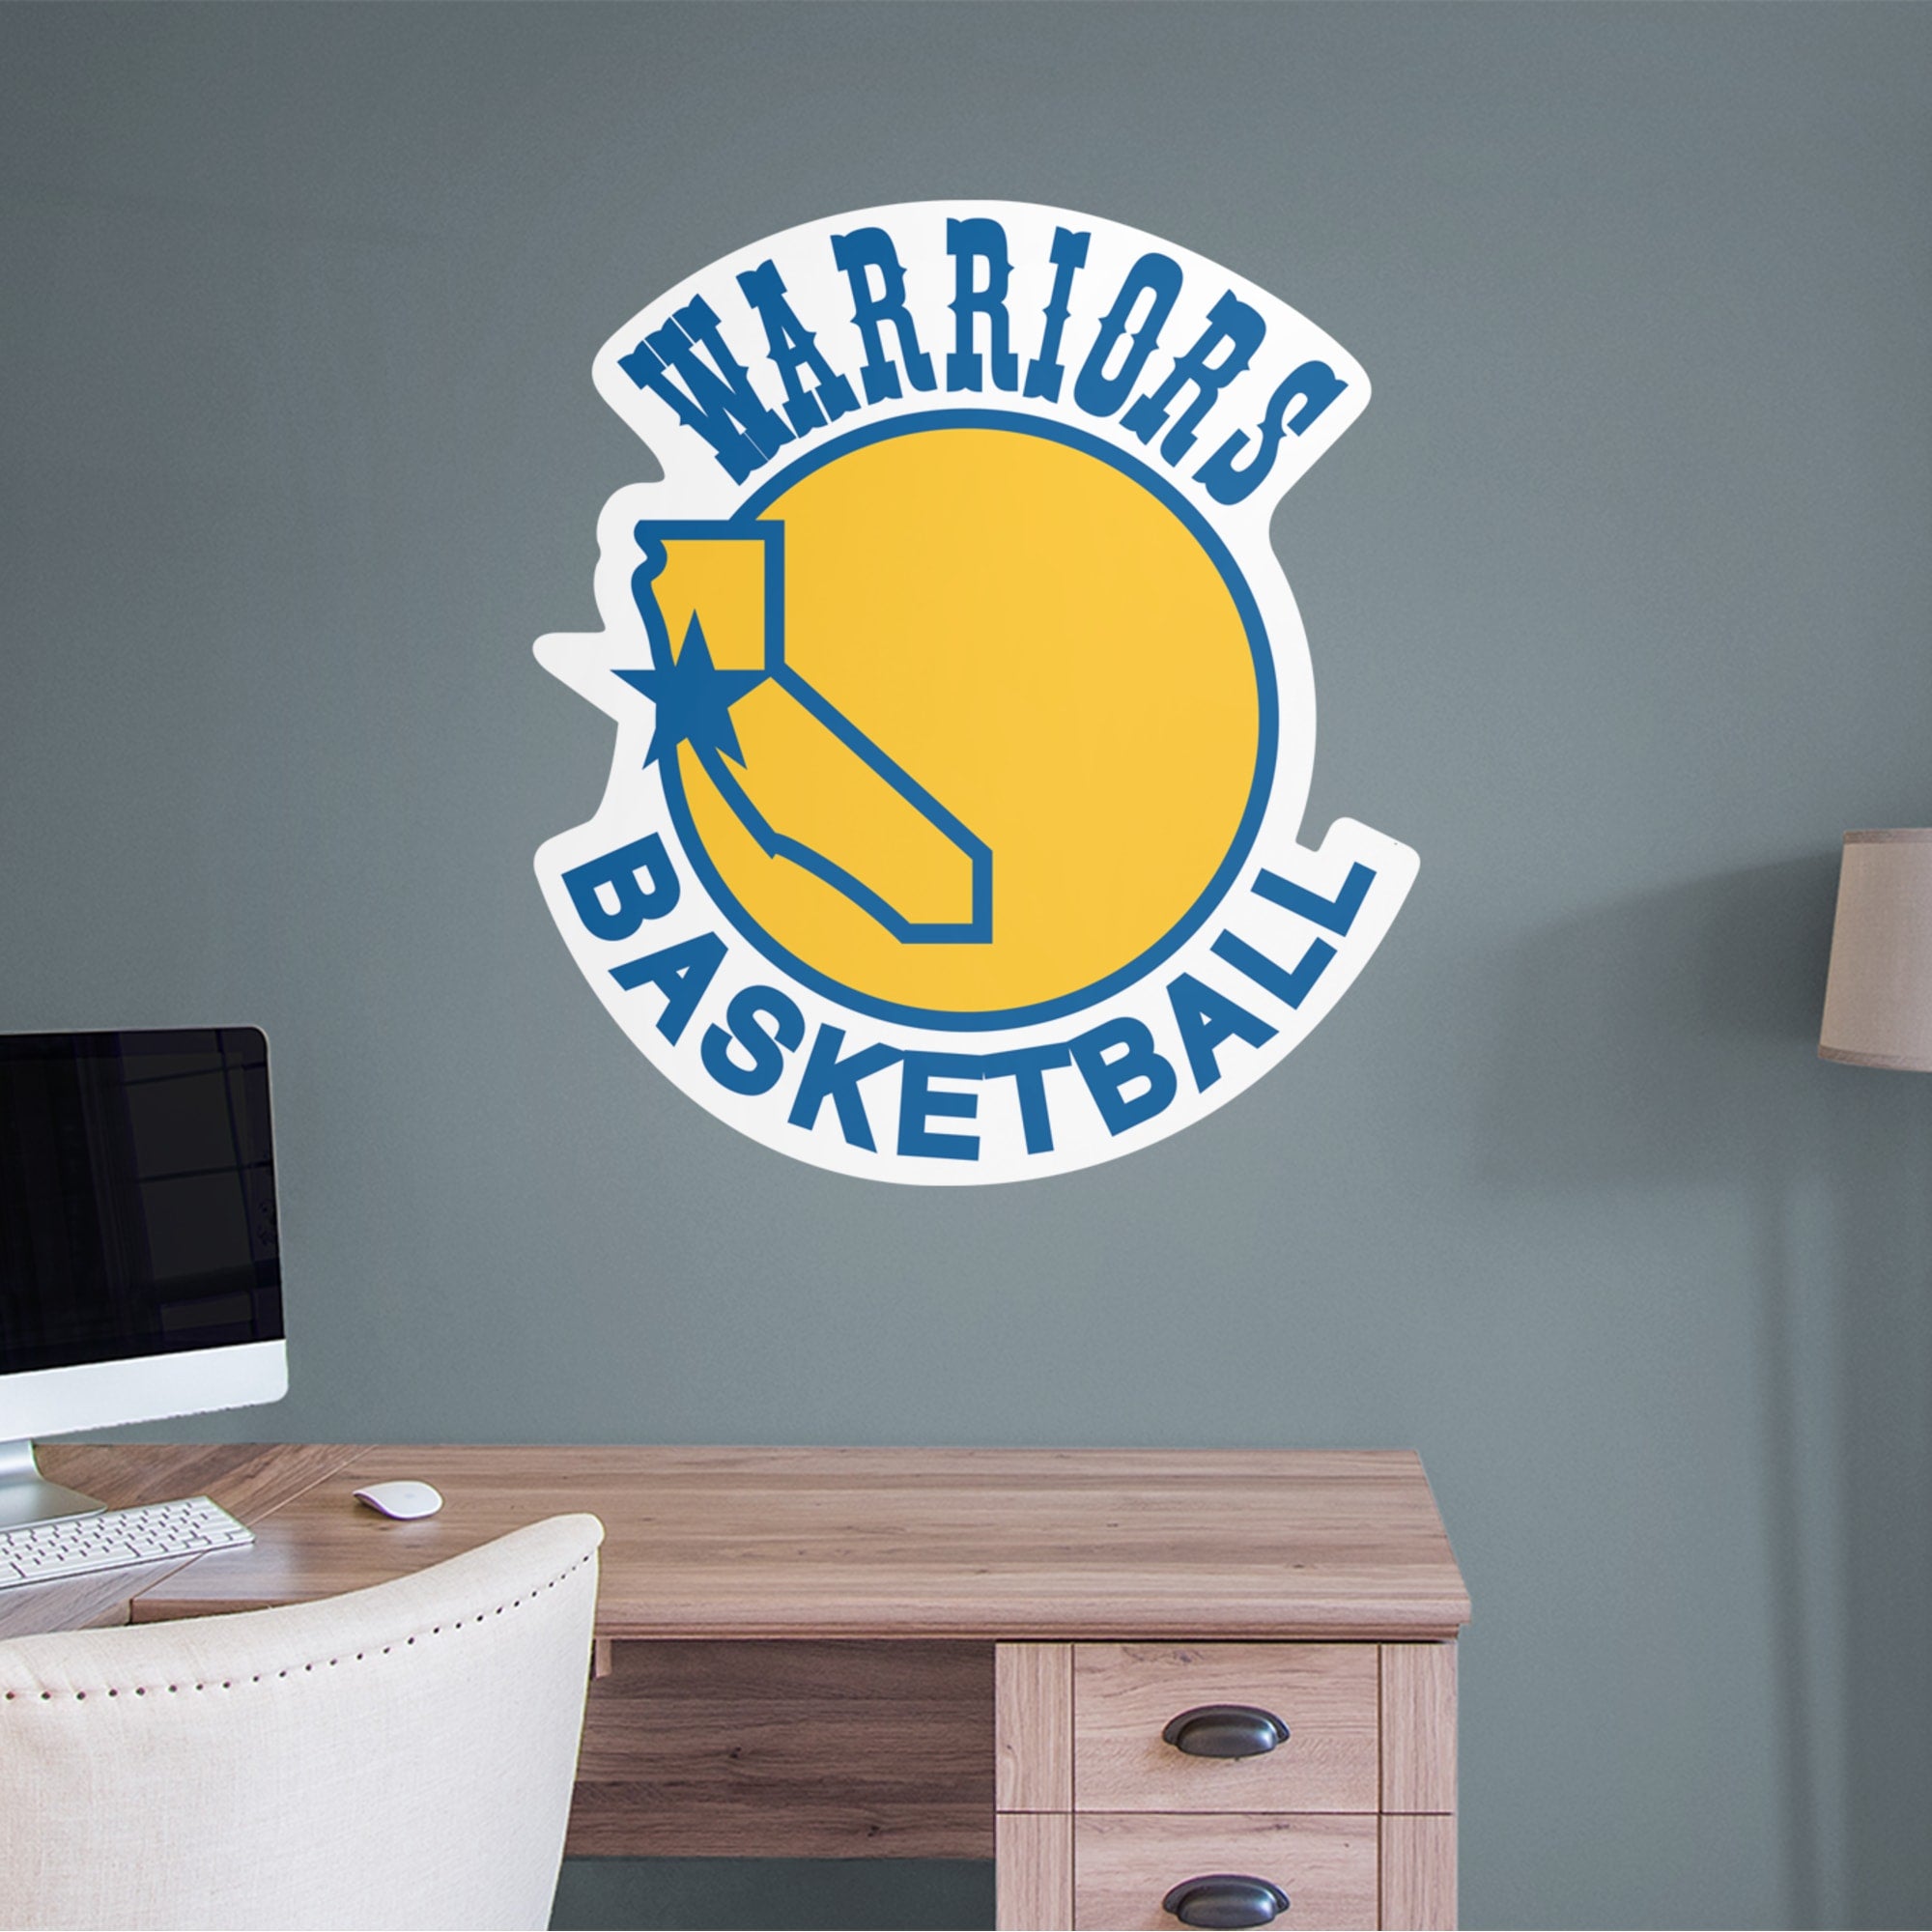 Golden State Warriors: Classic Logo - Officially Licensed NBA Removable Wall Decal 34.0"W x 38.0"H by Fathead | Vinyl